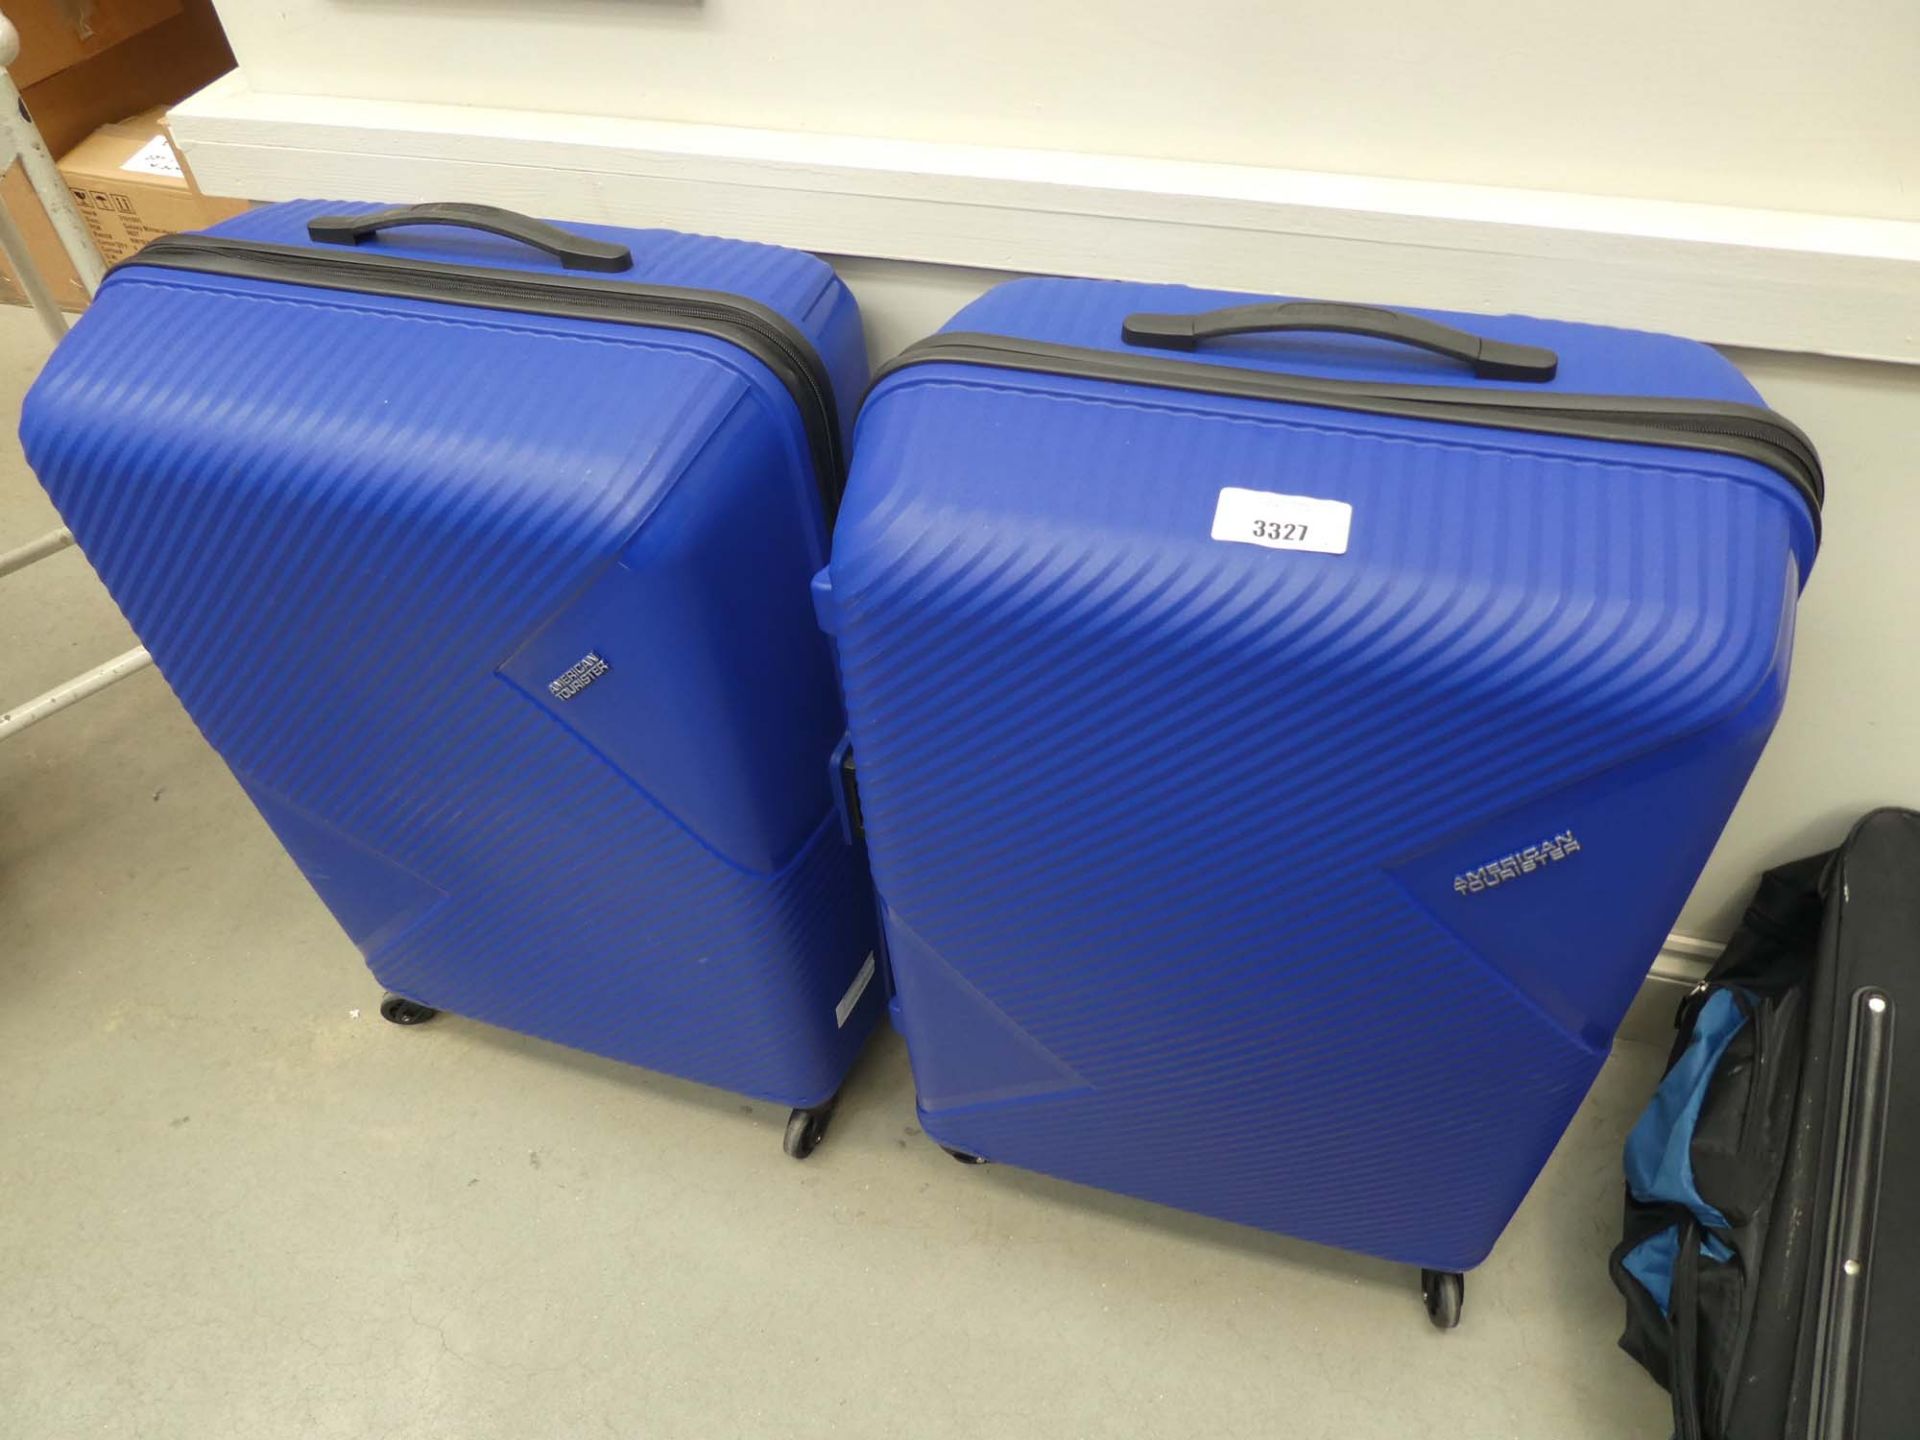 2 large hard shell American Tourister suitcases